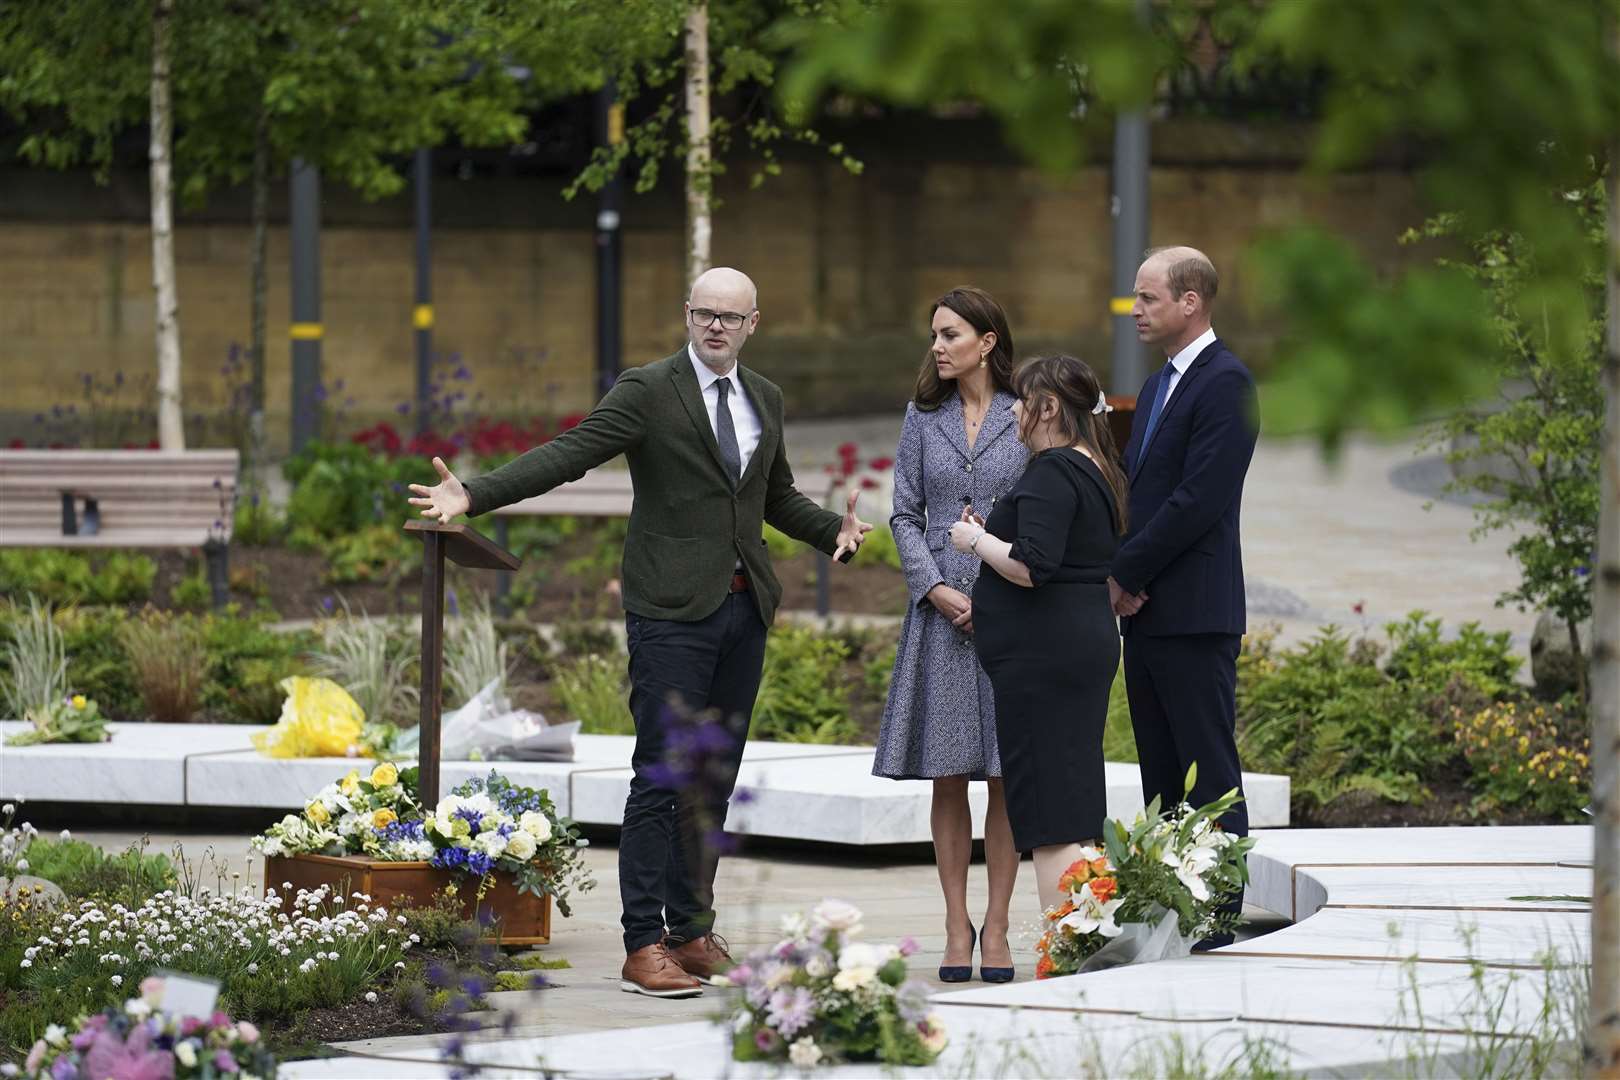 The Duke and Duchess of Cambridge attended the official opening of the memorial to those who died in the bombing – the Glade of Light Memorial in Manchester city centre – on May 10 (Jon Super/PA)